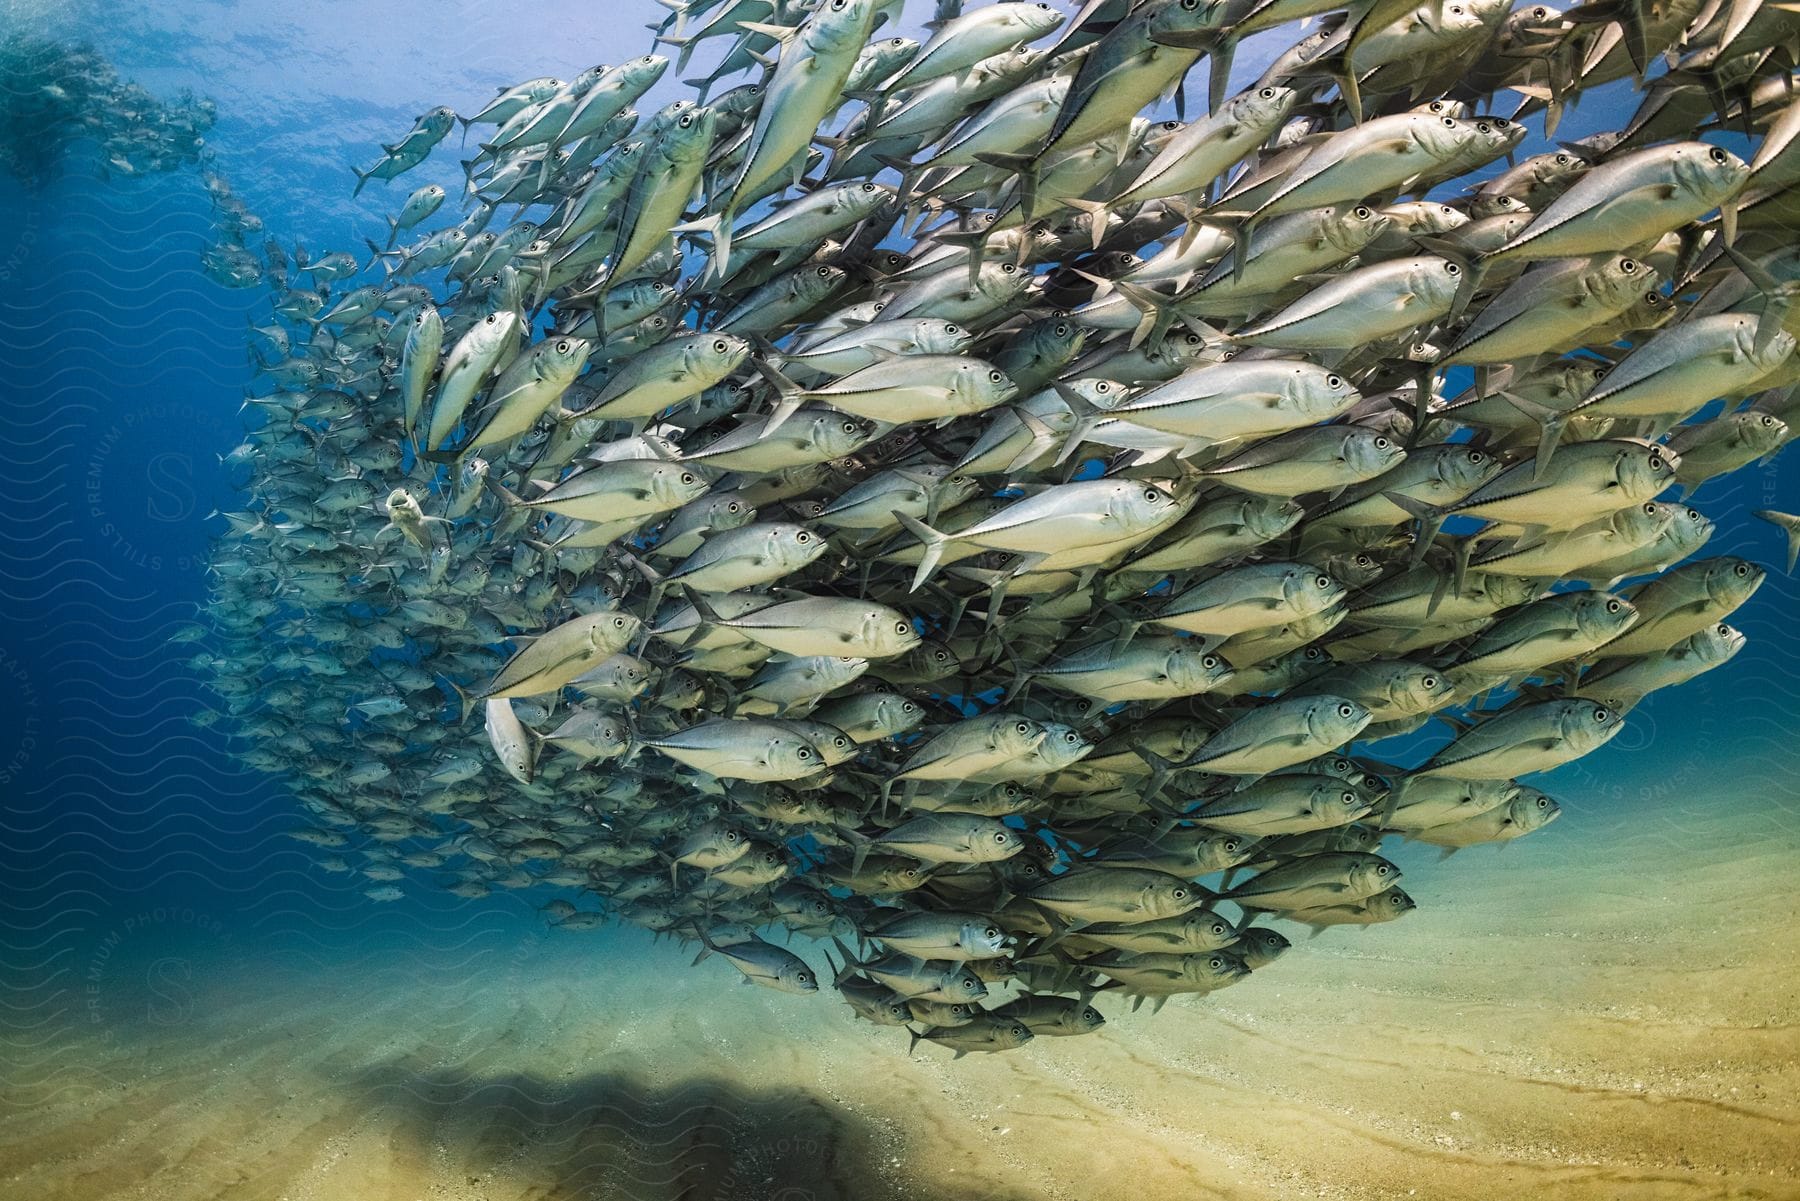 A synchronized group of fish swimming gracefully in the vibrant underwater world of the sea